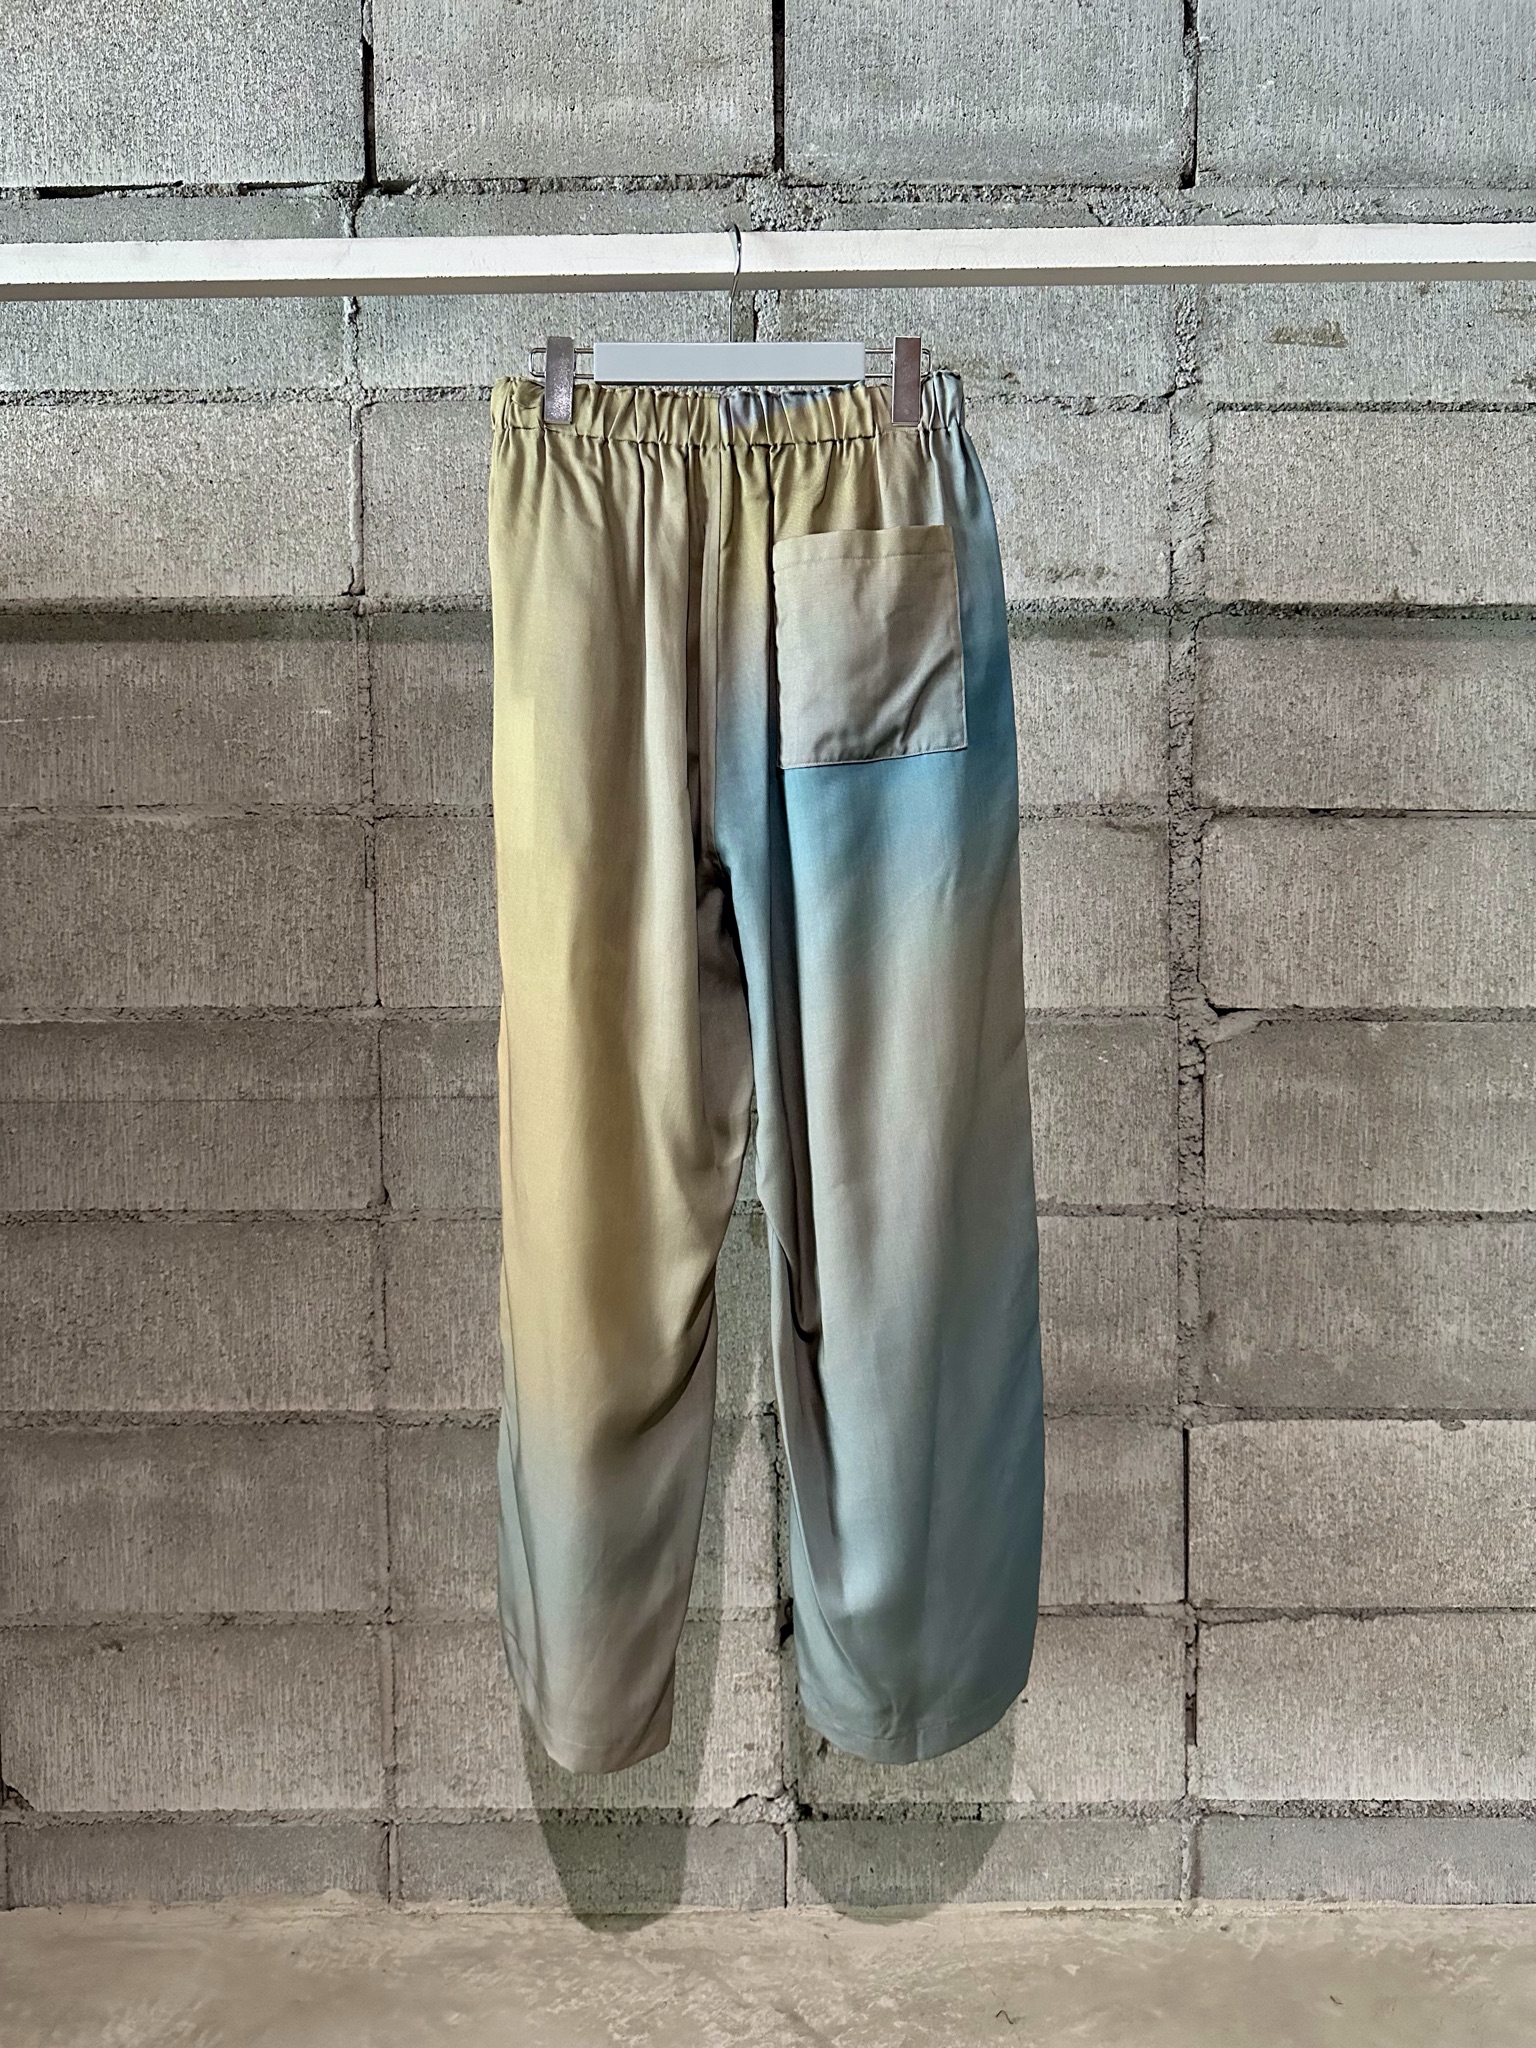 CITYYOKE(ヨーク) 23SS Printed Easy Wide Pants